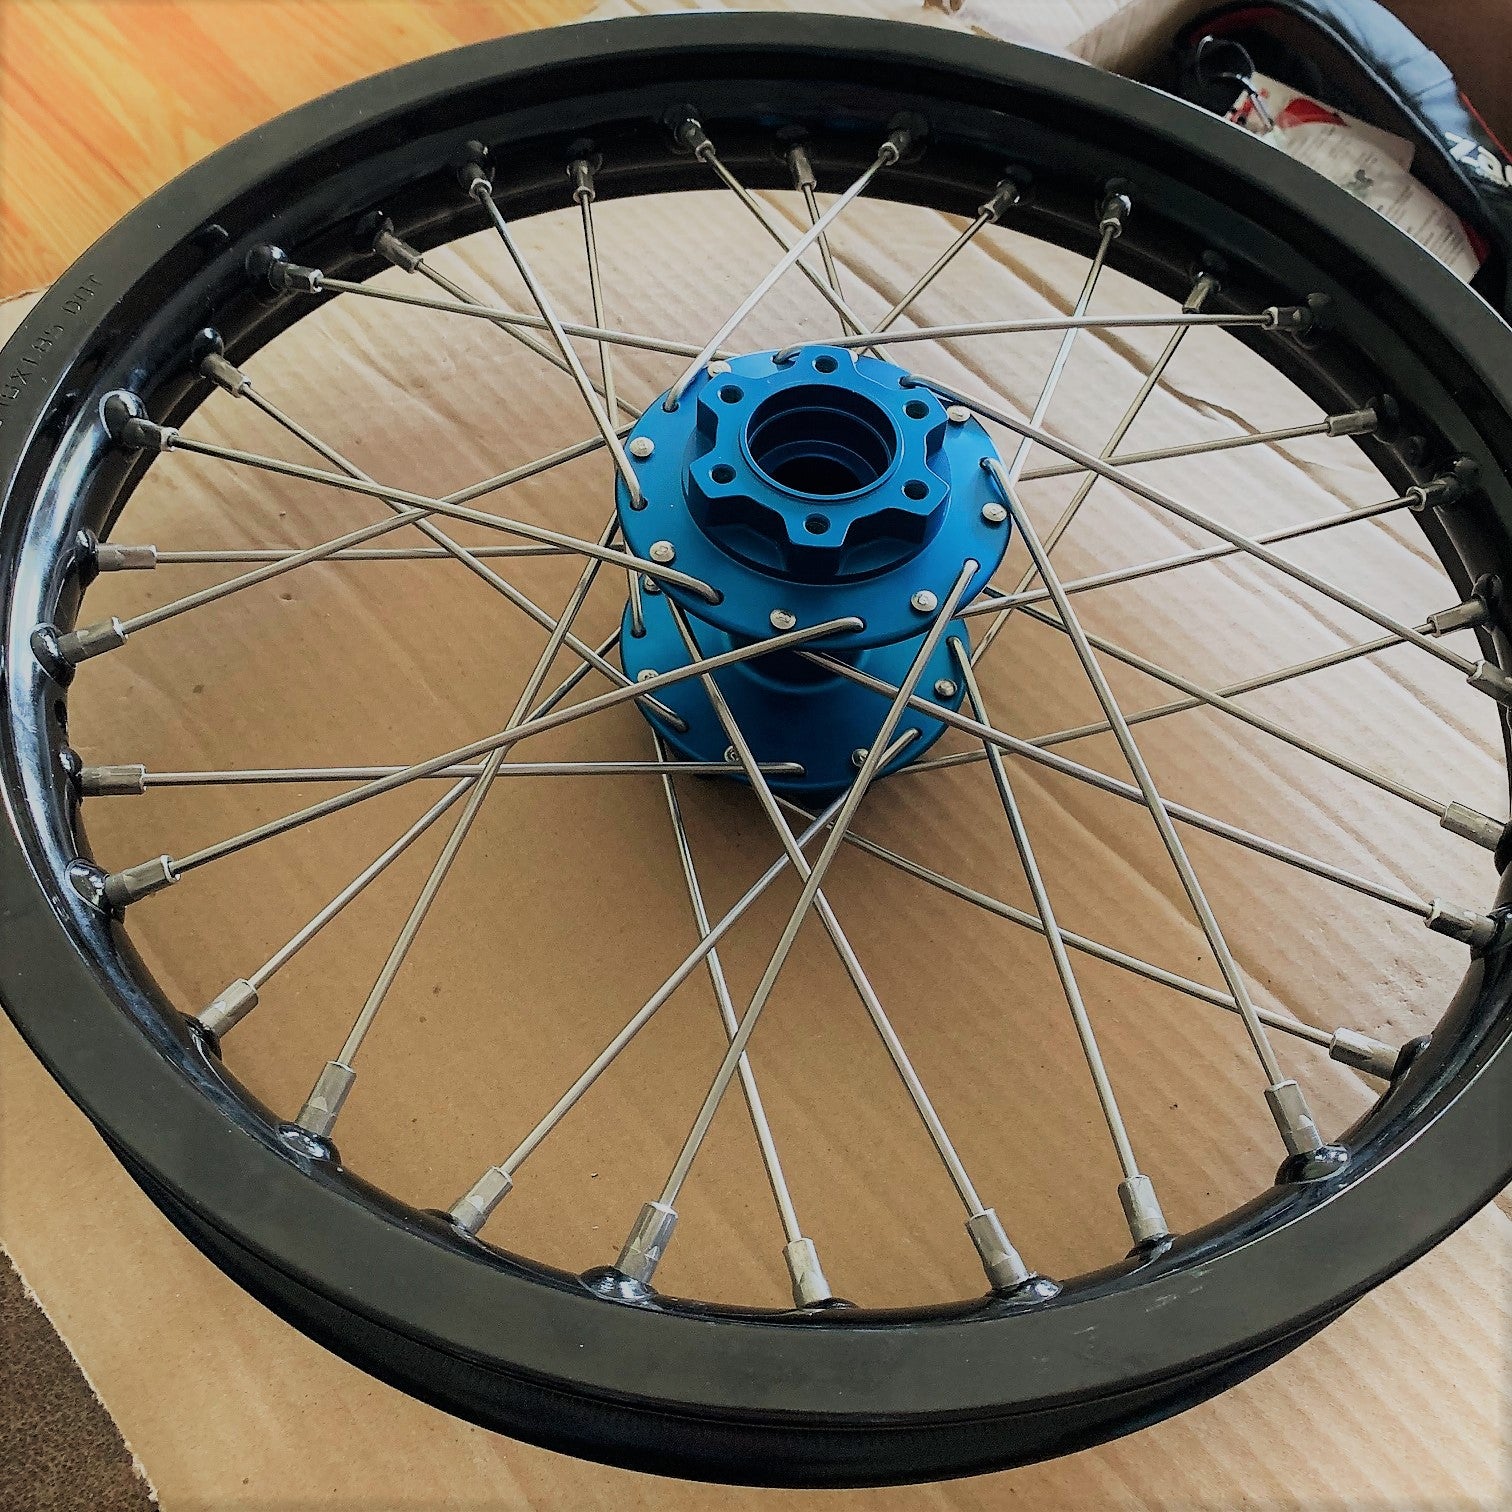 16" Charged Rear Wheel Upgrade for Surron and Segway